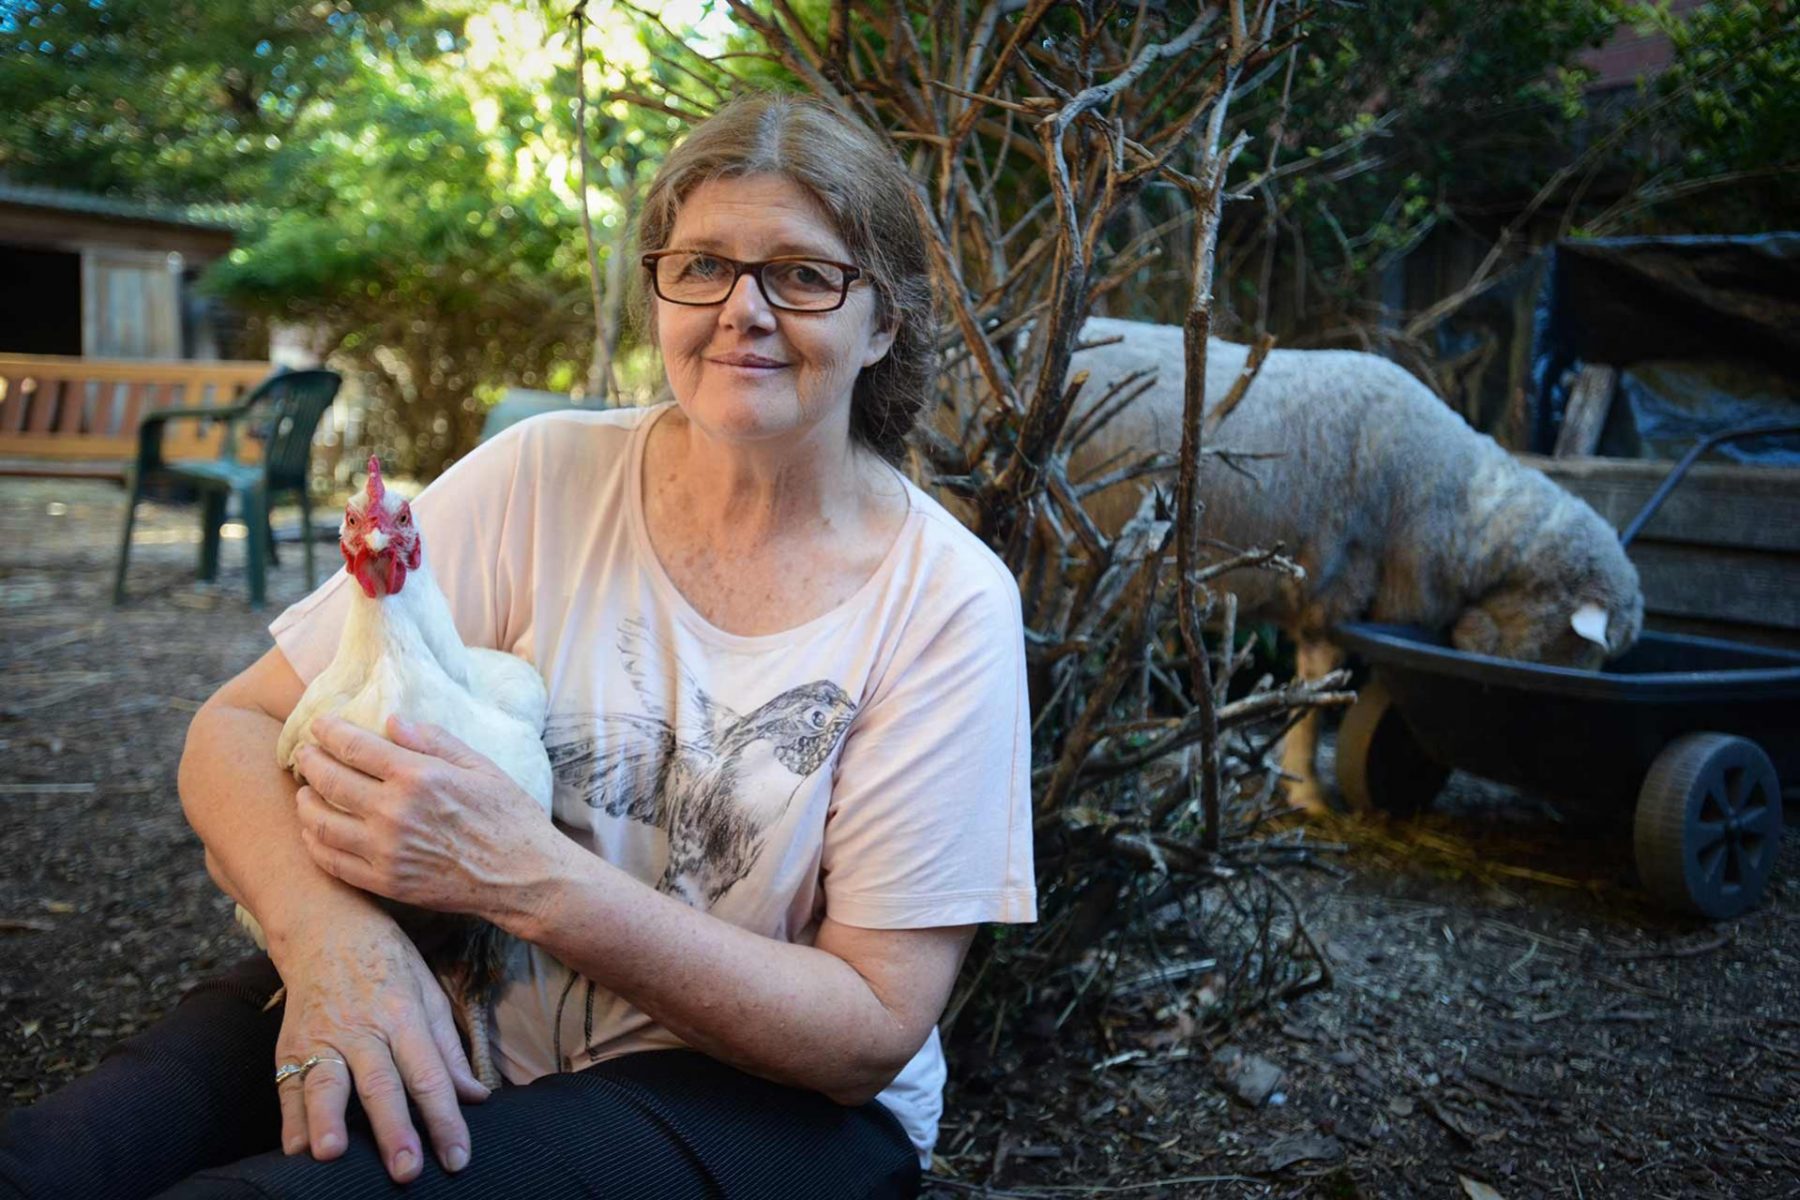 Animal Liberation Victoria founder, Patty Mark, with rescued animals in her yard. Mark created the concept of open rescues, a practice which continues by many liberation groups today. Australia, 2013